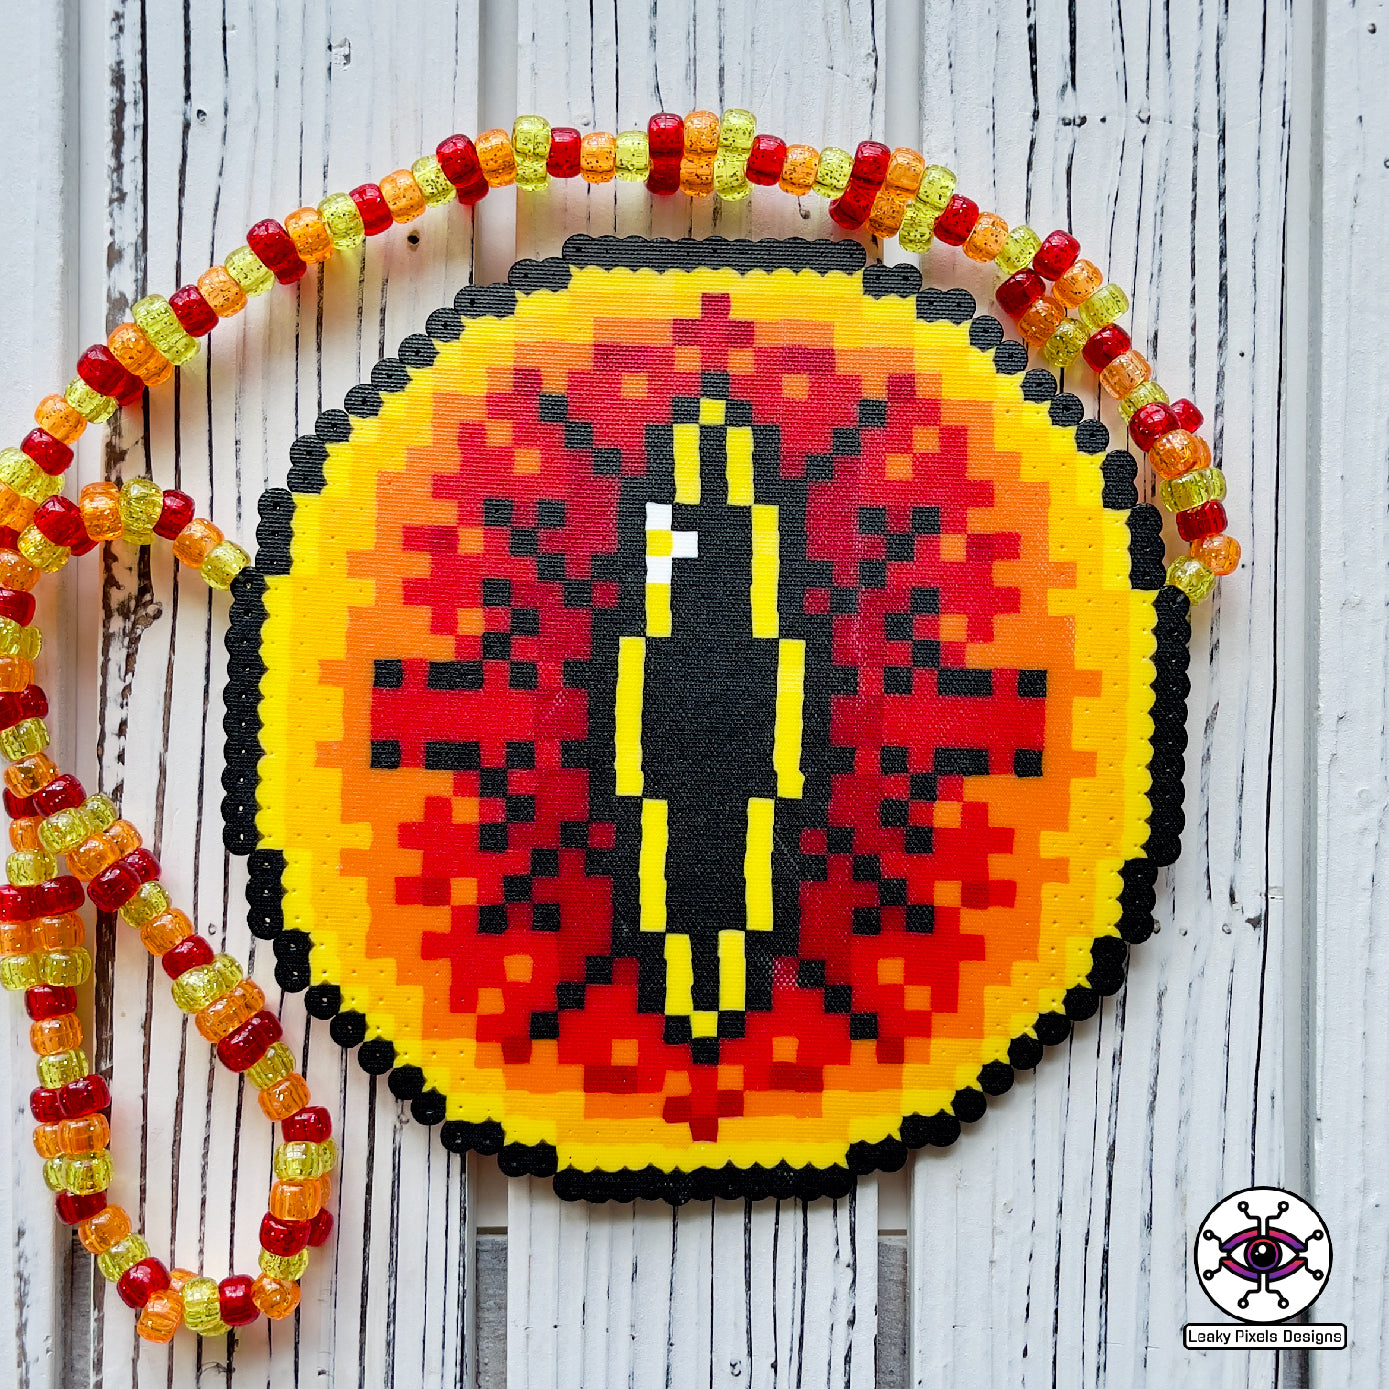 Eye of sauron perler necklace. Large fiery eye with darkness inside it. from Lord of the rings. has red, orange and yellow pony beads as a necklace.